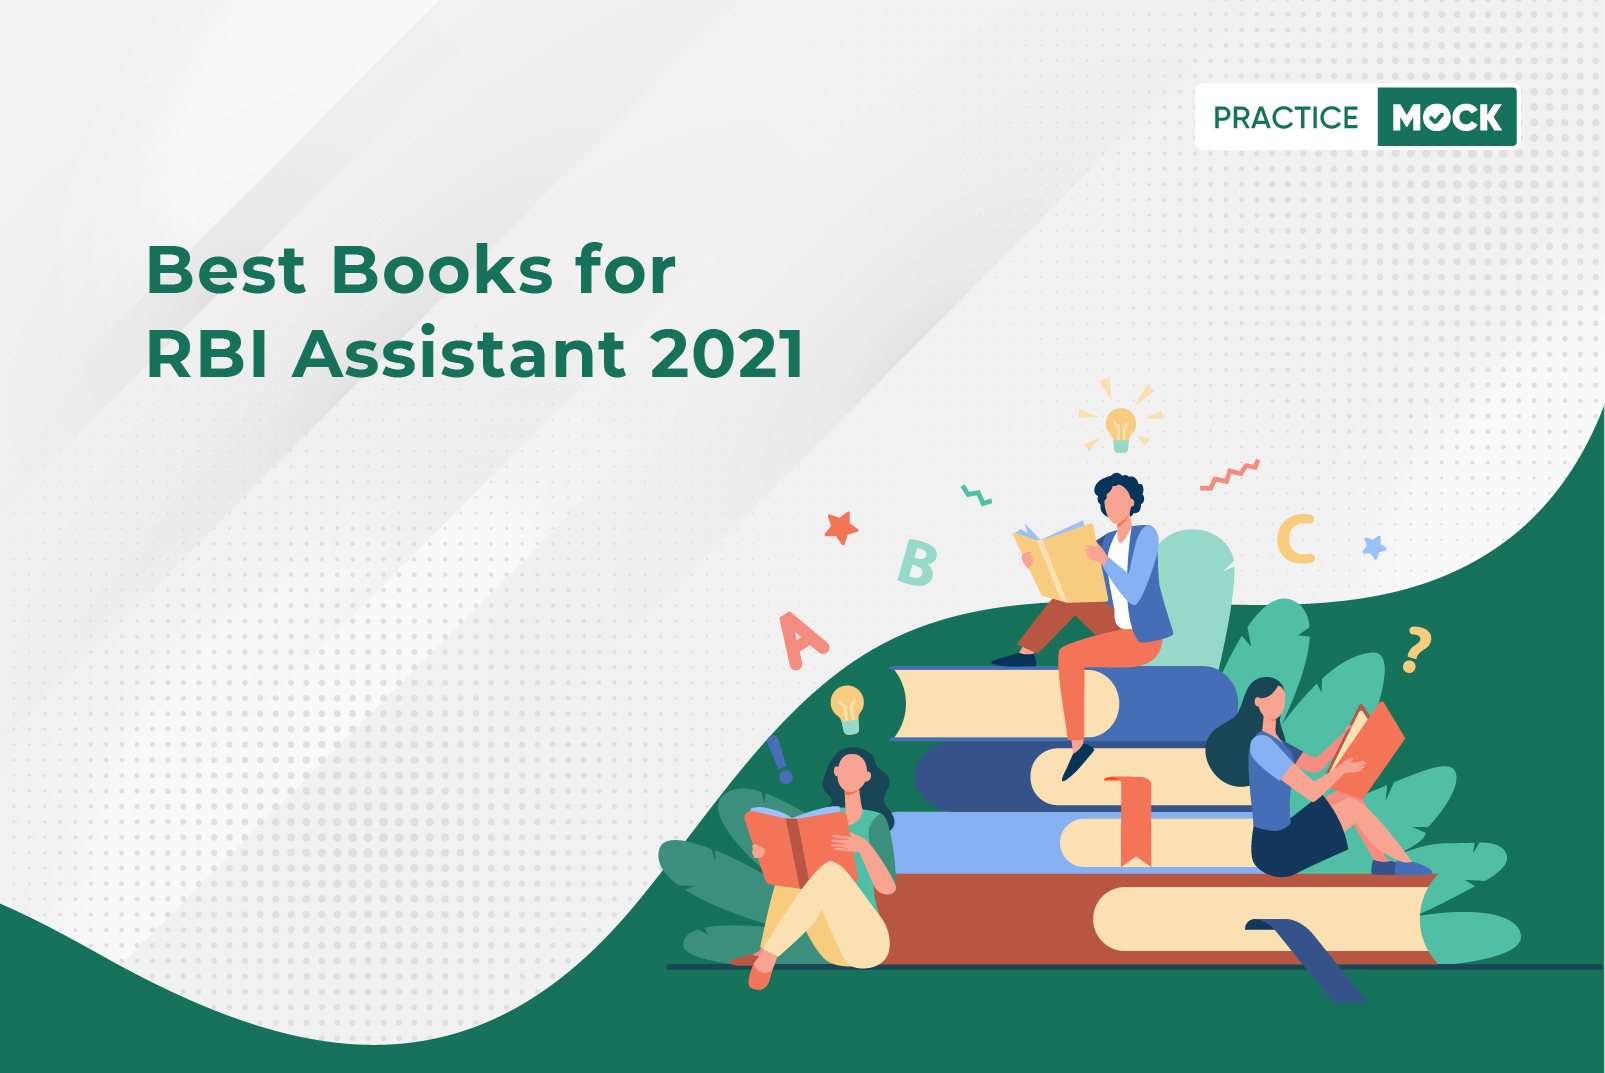 RBI Assistant 2021 Books